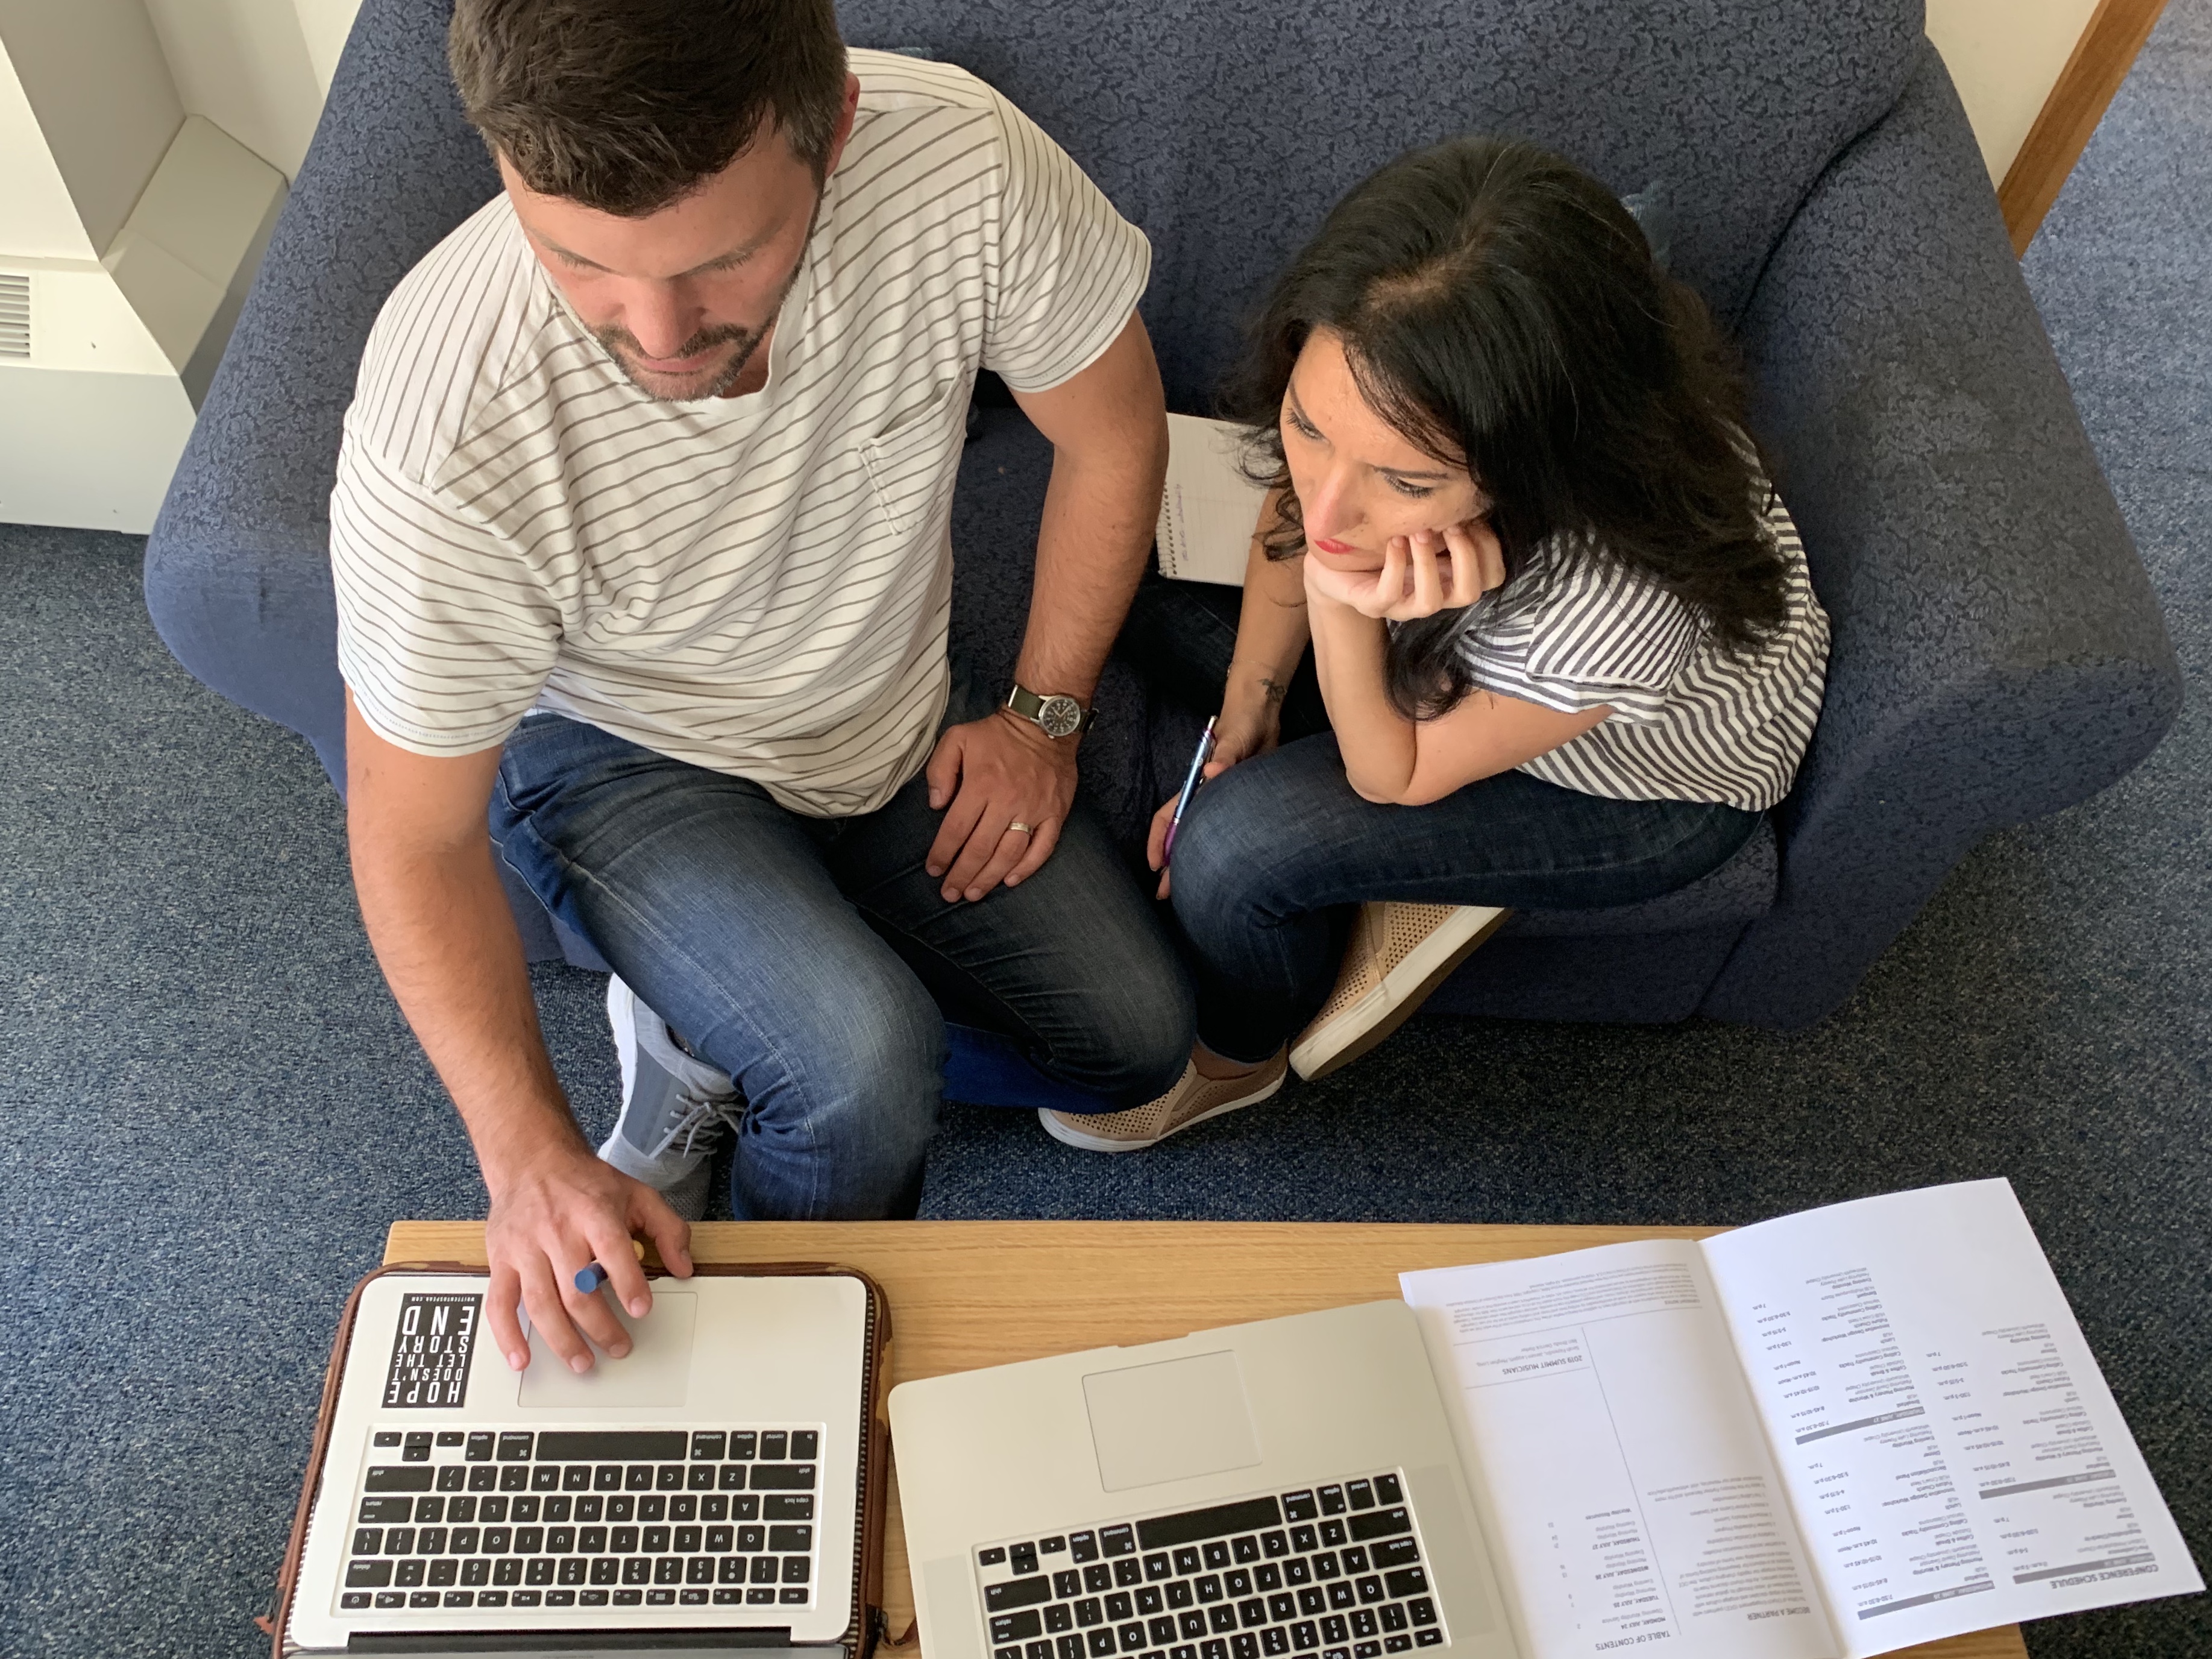 Bobby Harrison and Inés Velásquez-McBryde working together on their laptops